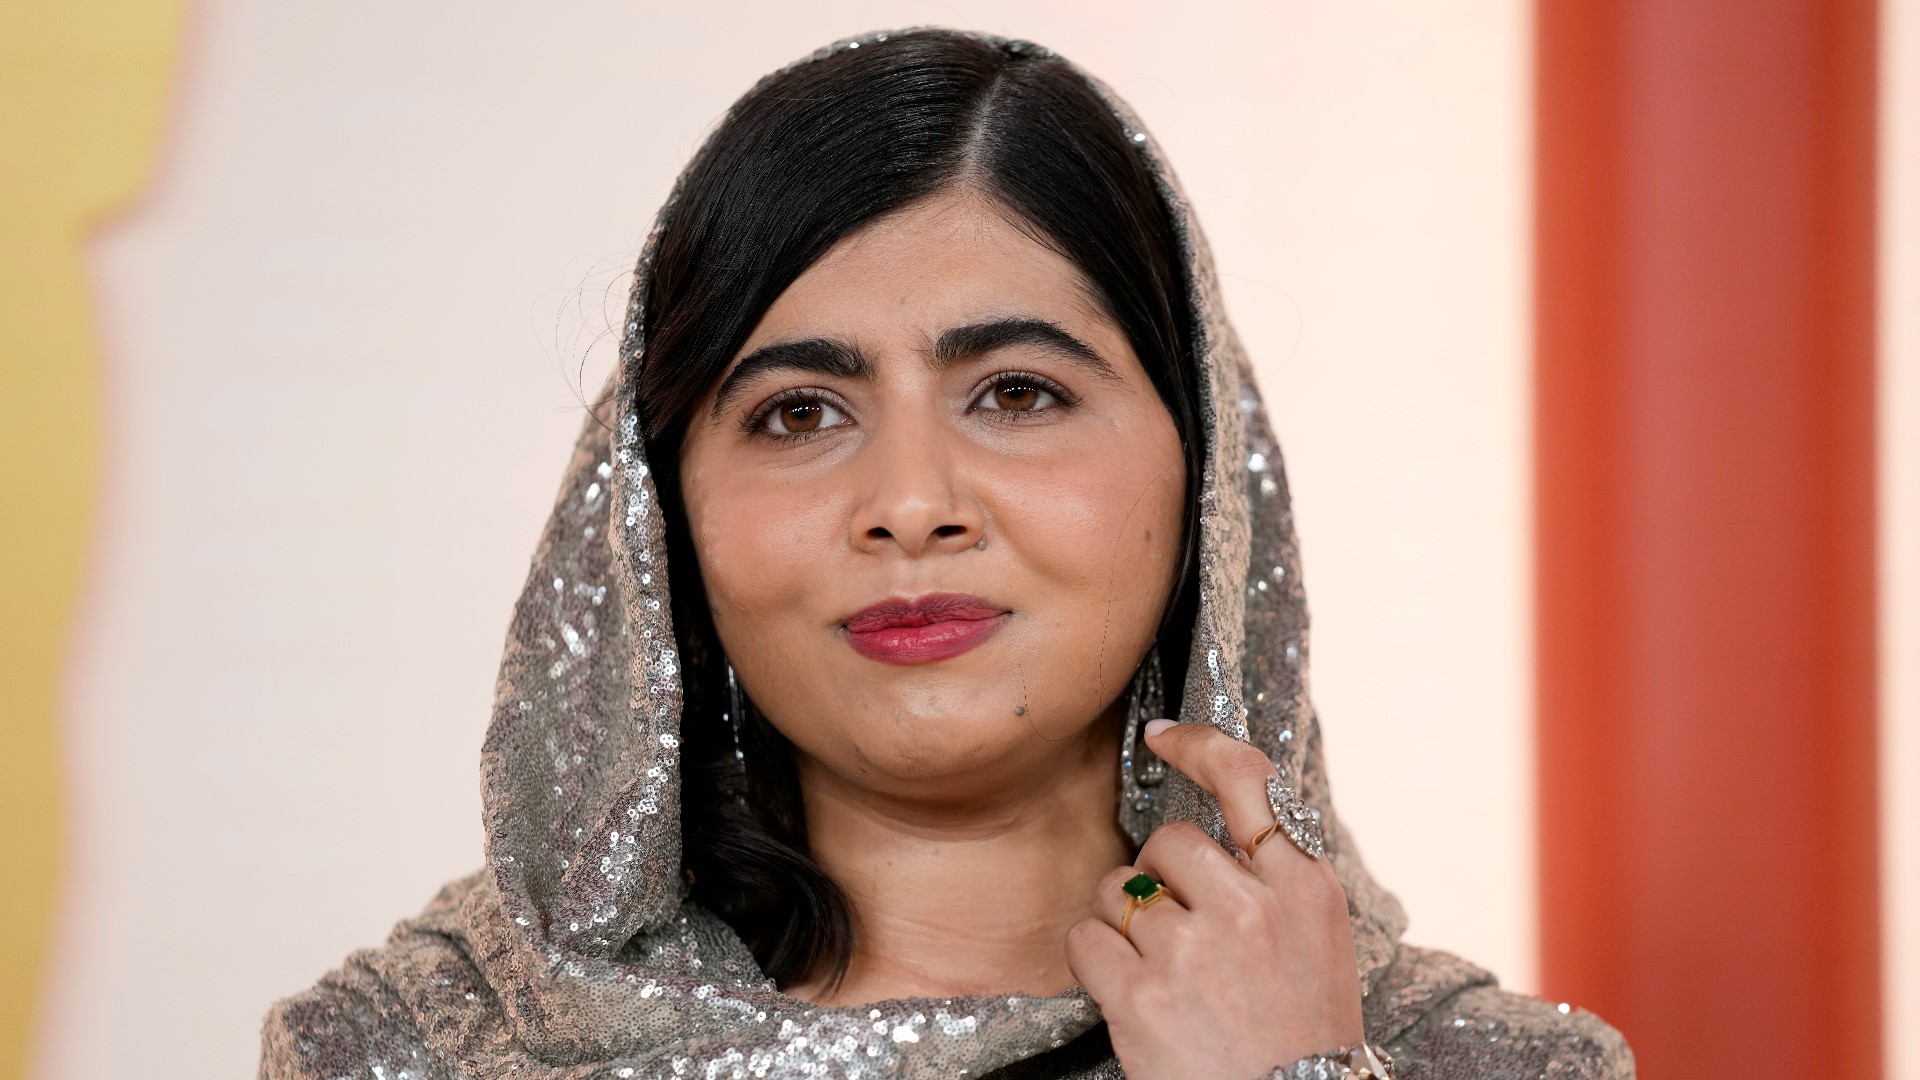 On the first day of Ramadan, Kristen and Ellen focus on the contributions of Pakistani activist Mulala Yousafzal and her push for educating all women and girls.